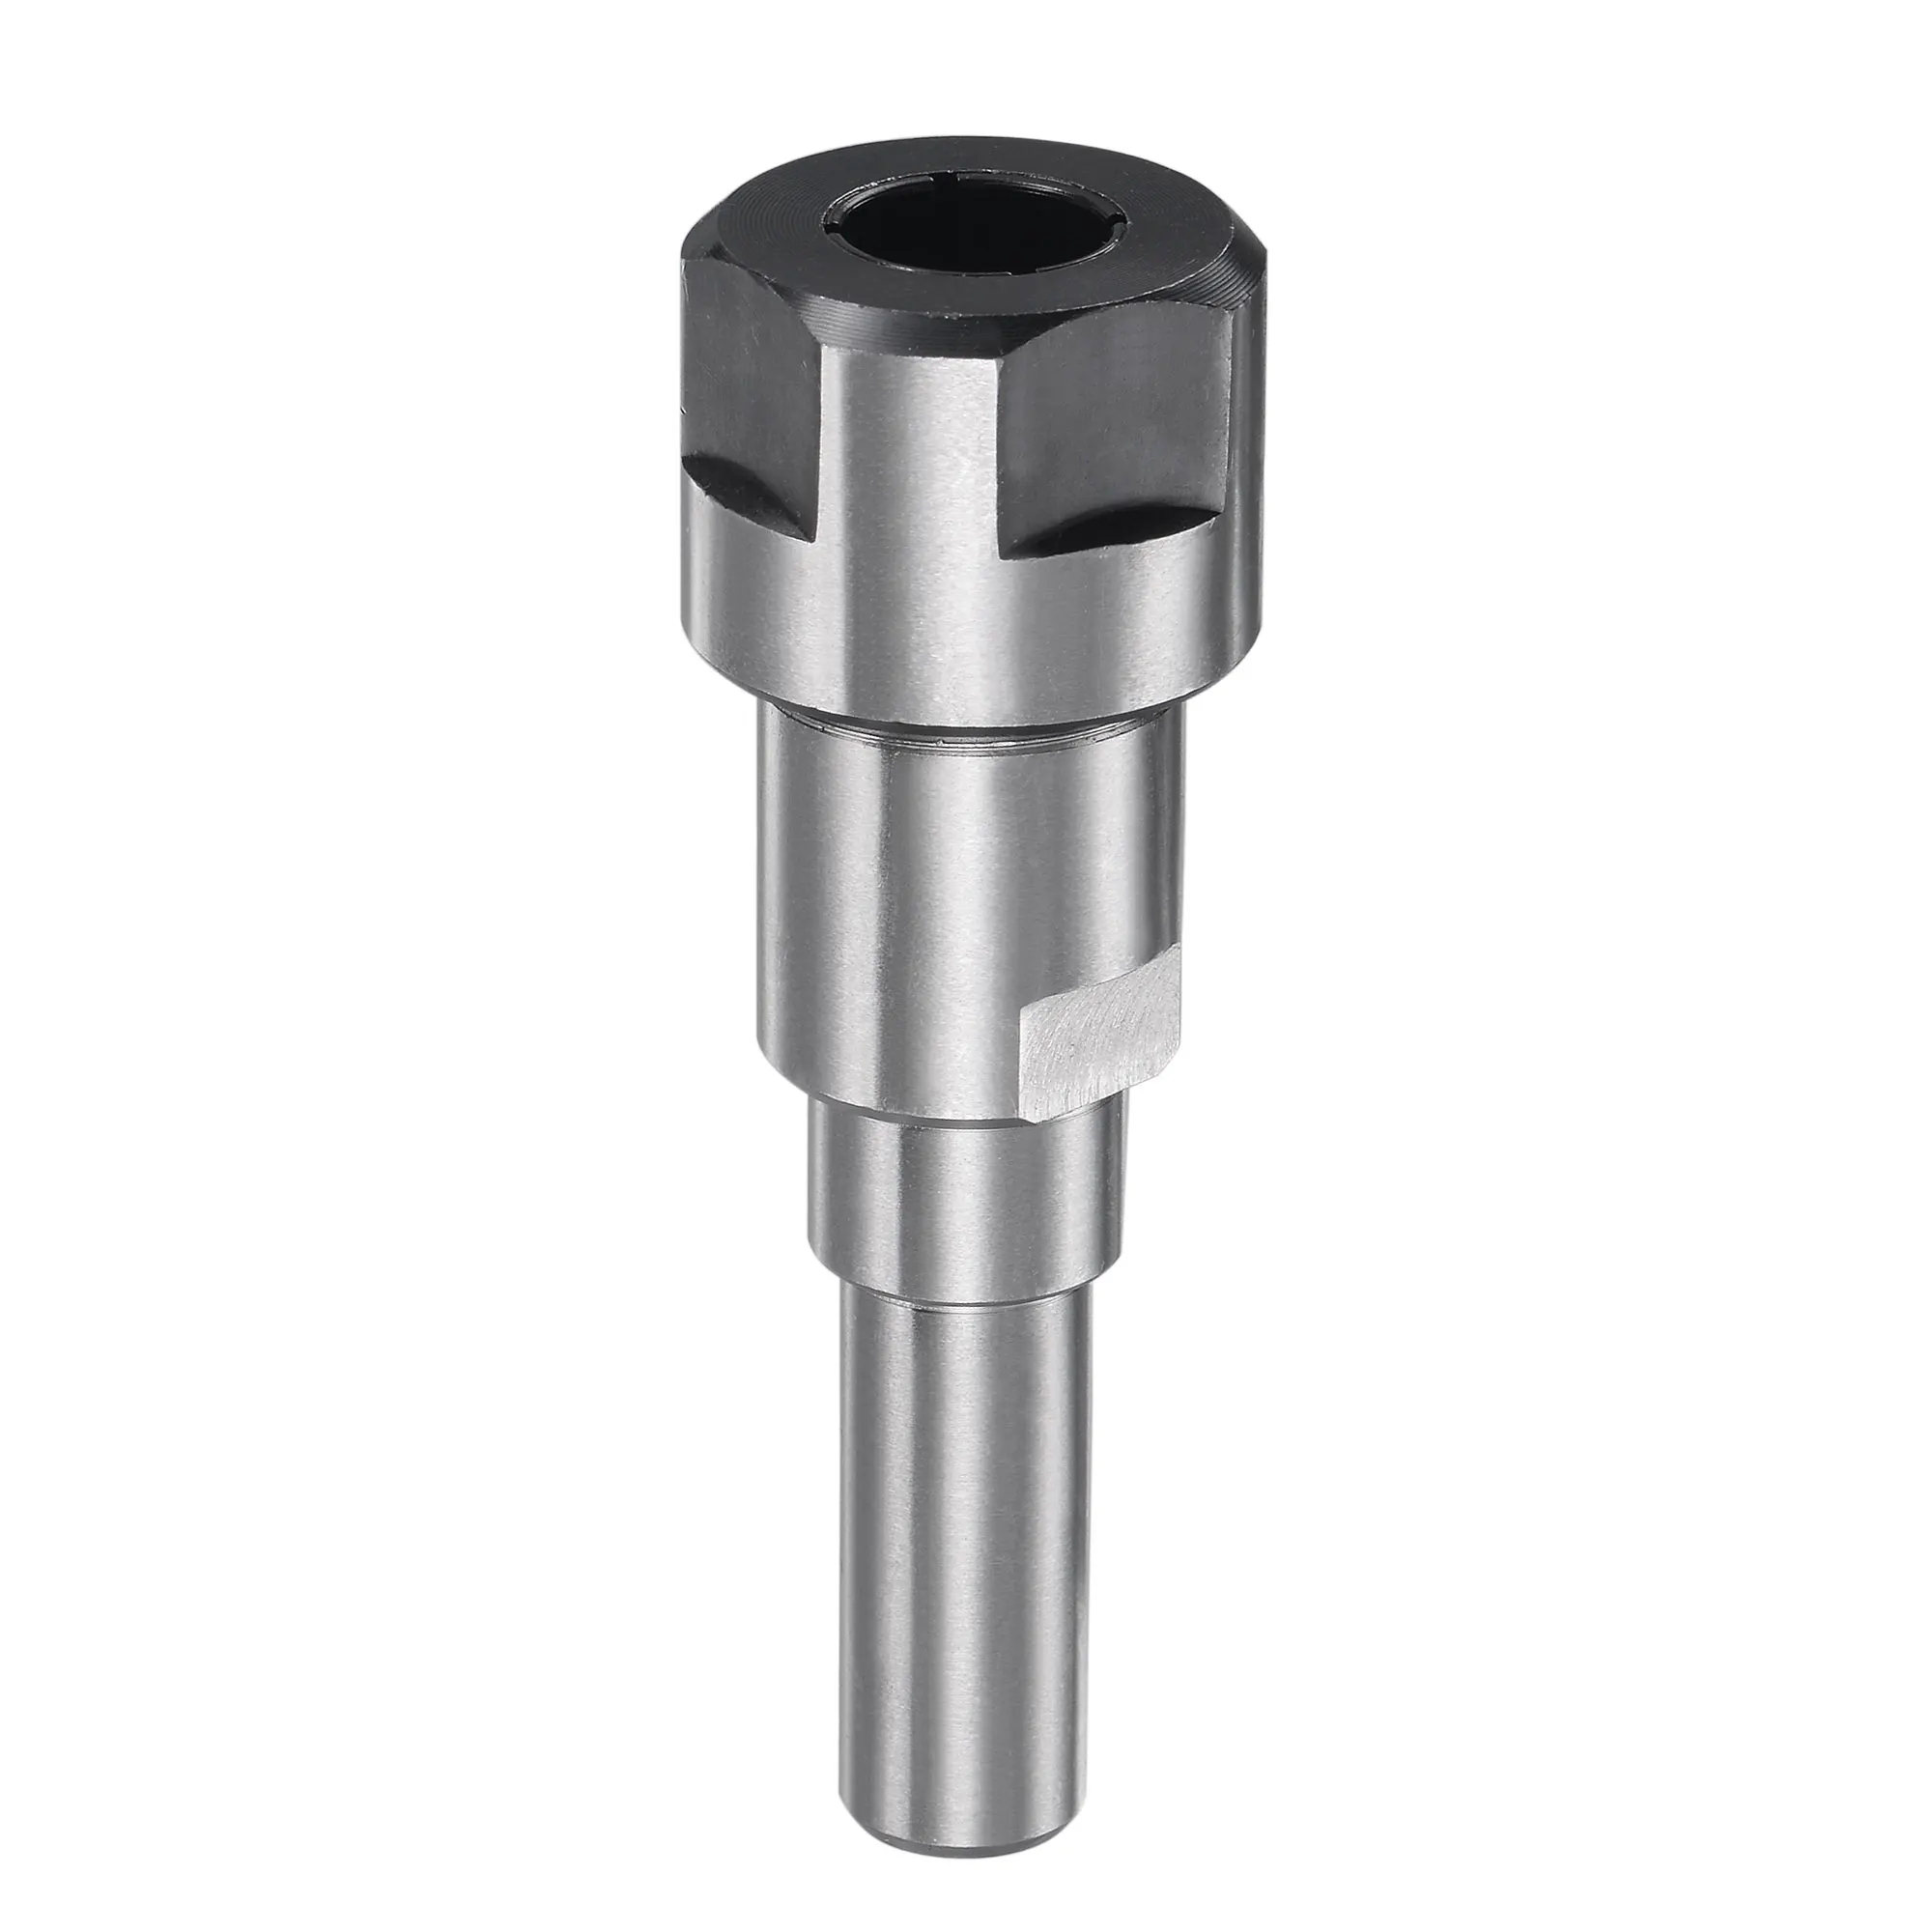 

Uxcell Router Collet Extension Rod Converter Adapter 12mm to 12mm for CNC Engraving Machine Woodworking Milling Bit